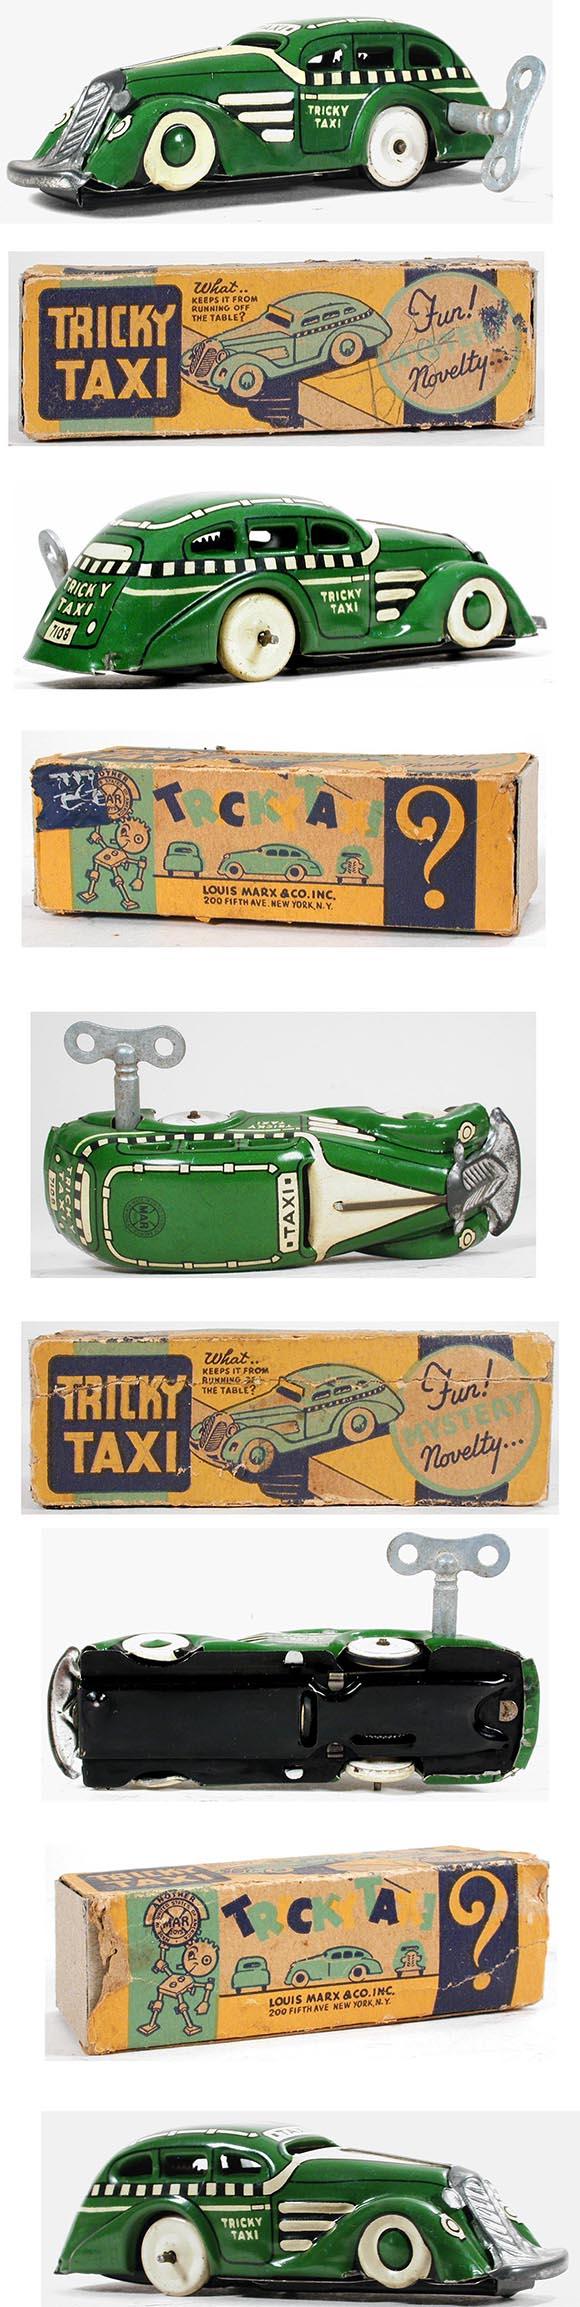 1948 Marx, Checkered Green Tricky Taxi in Original Box